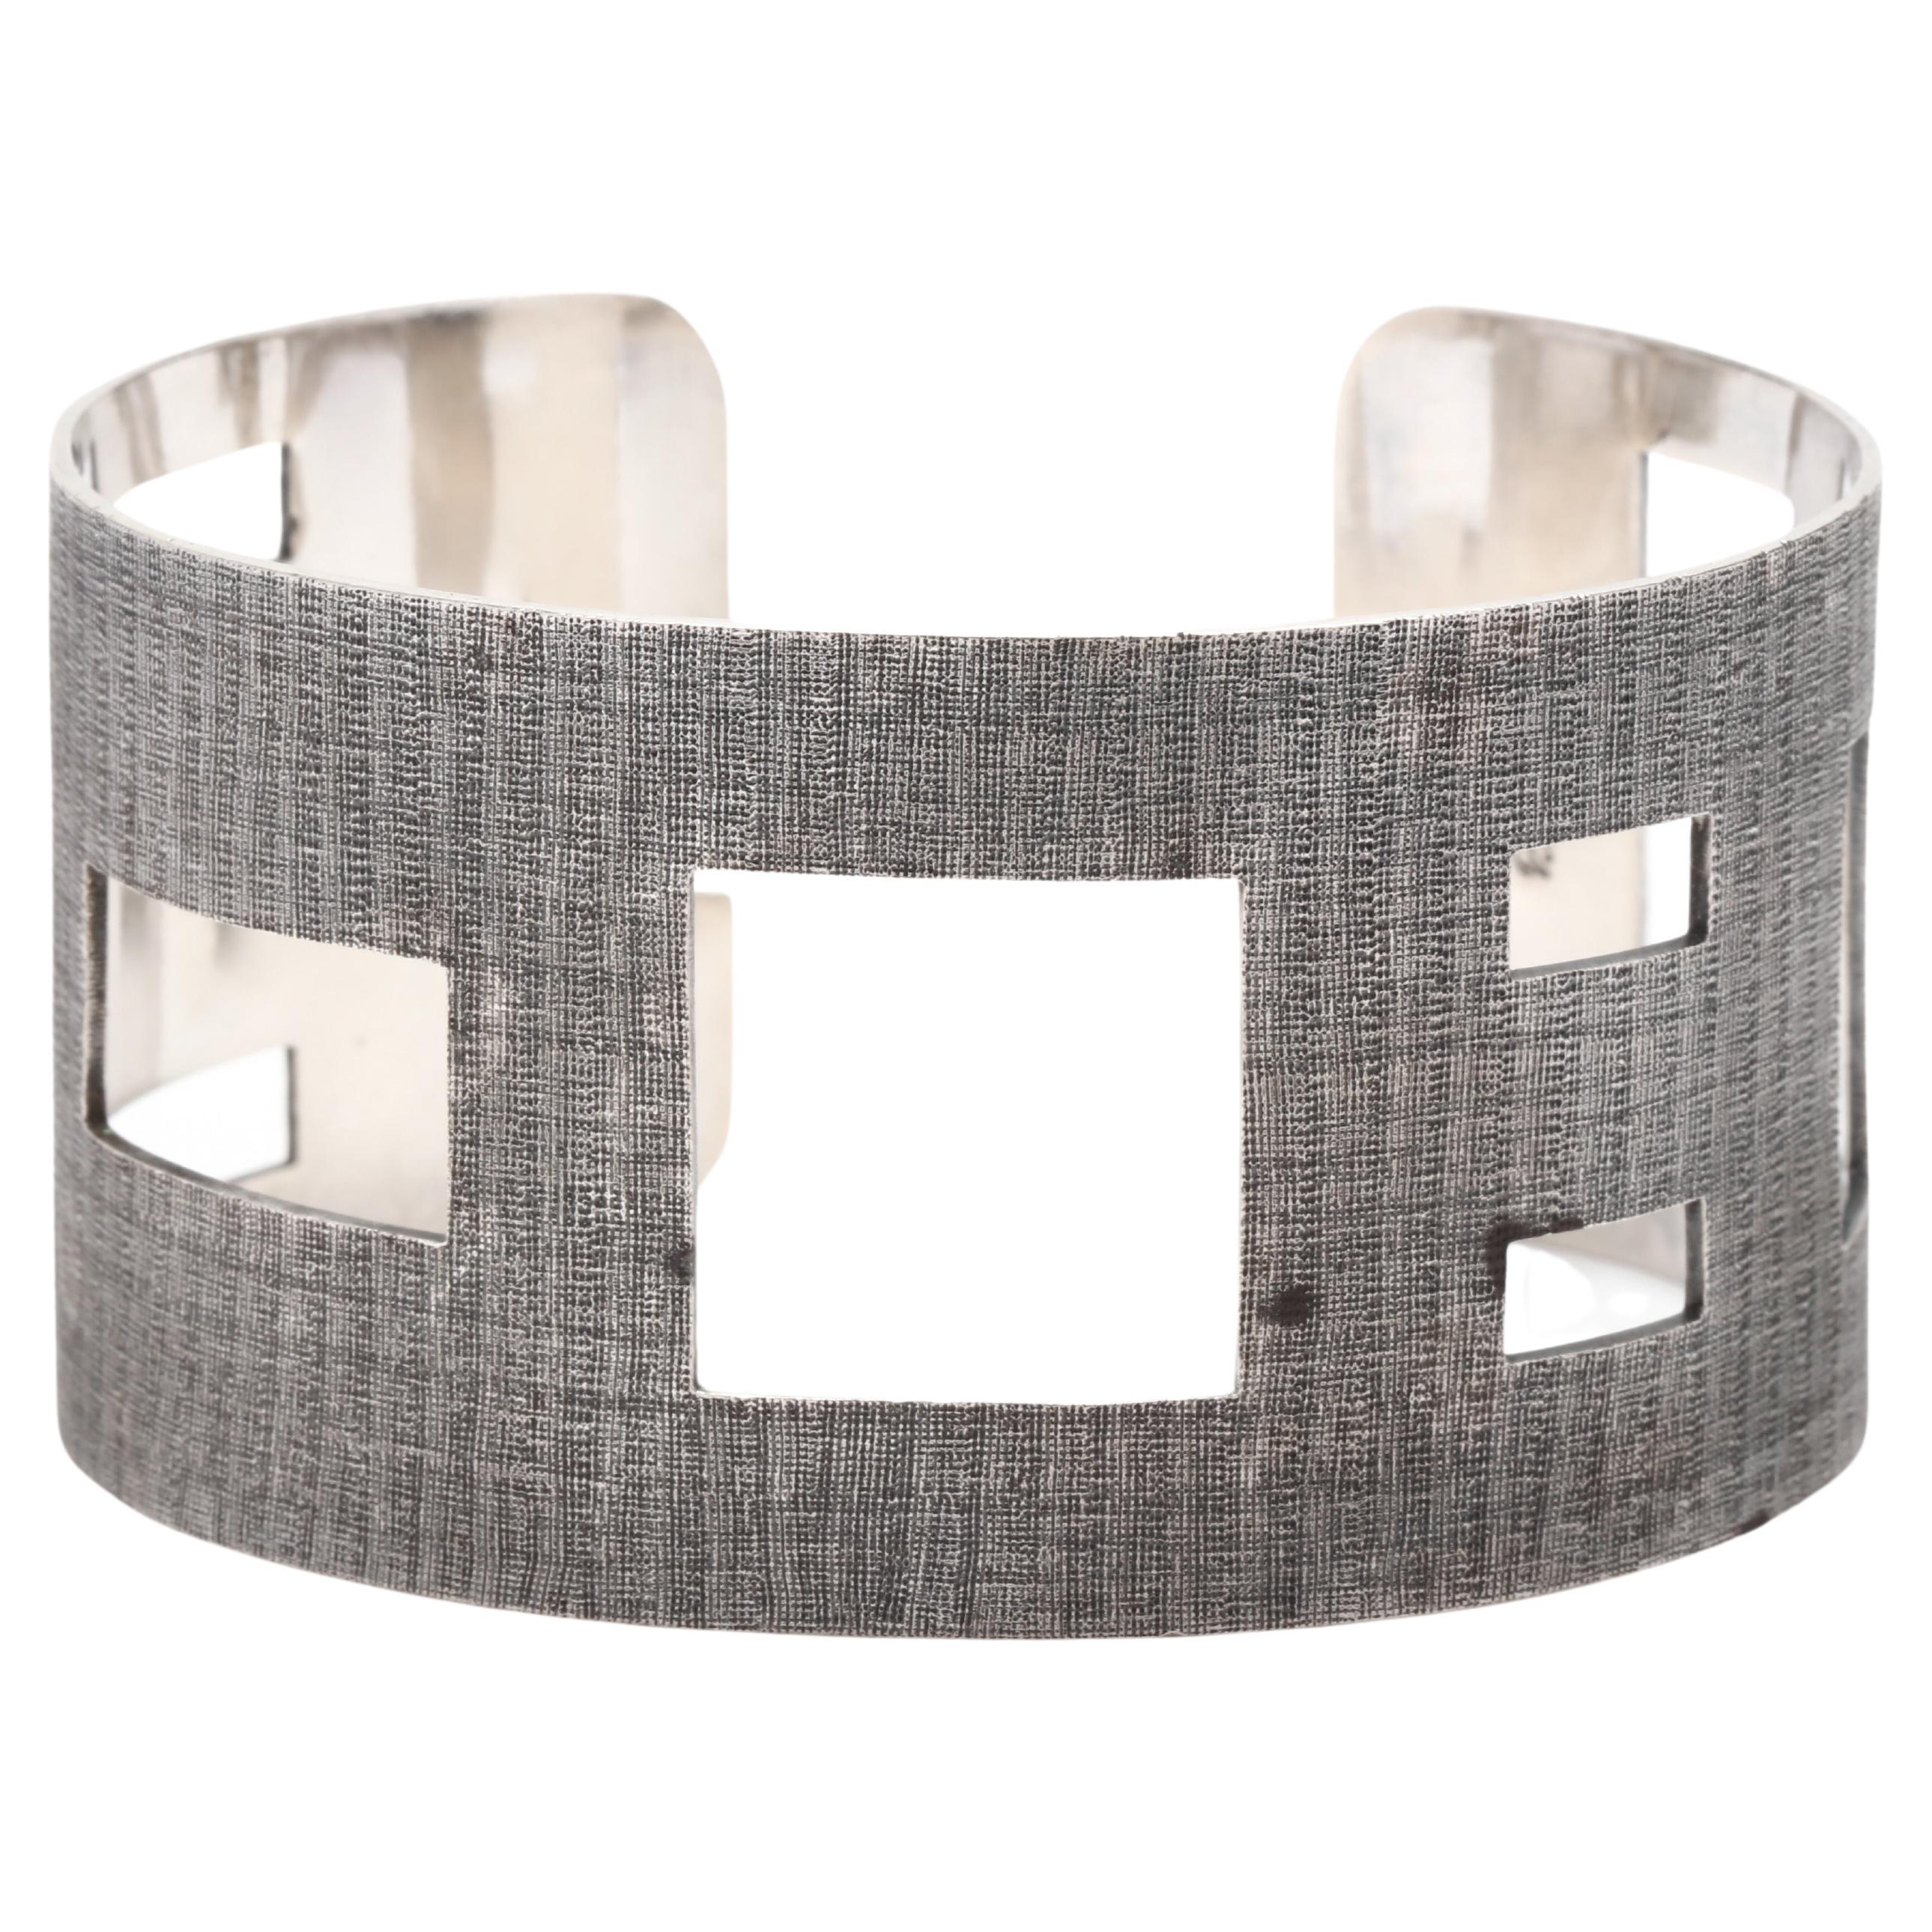 Geometric Cut-Out Cuff Bracelet, Sterling Silver, Length 7.5 inch, Wide Silver For Sale